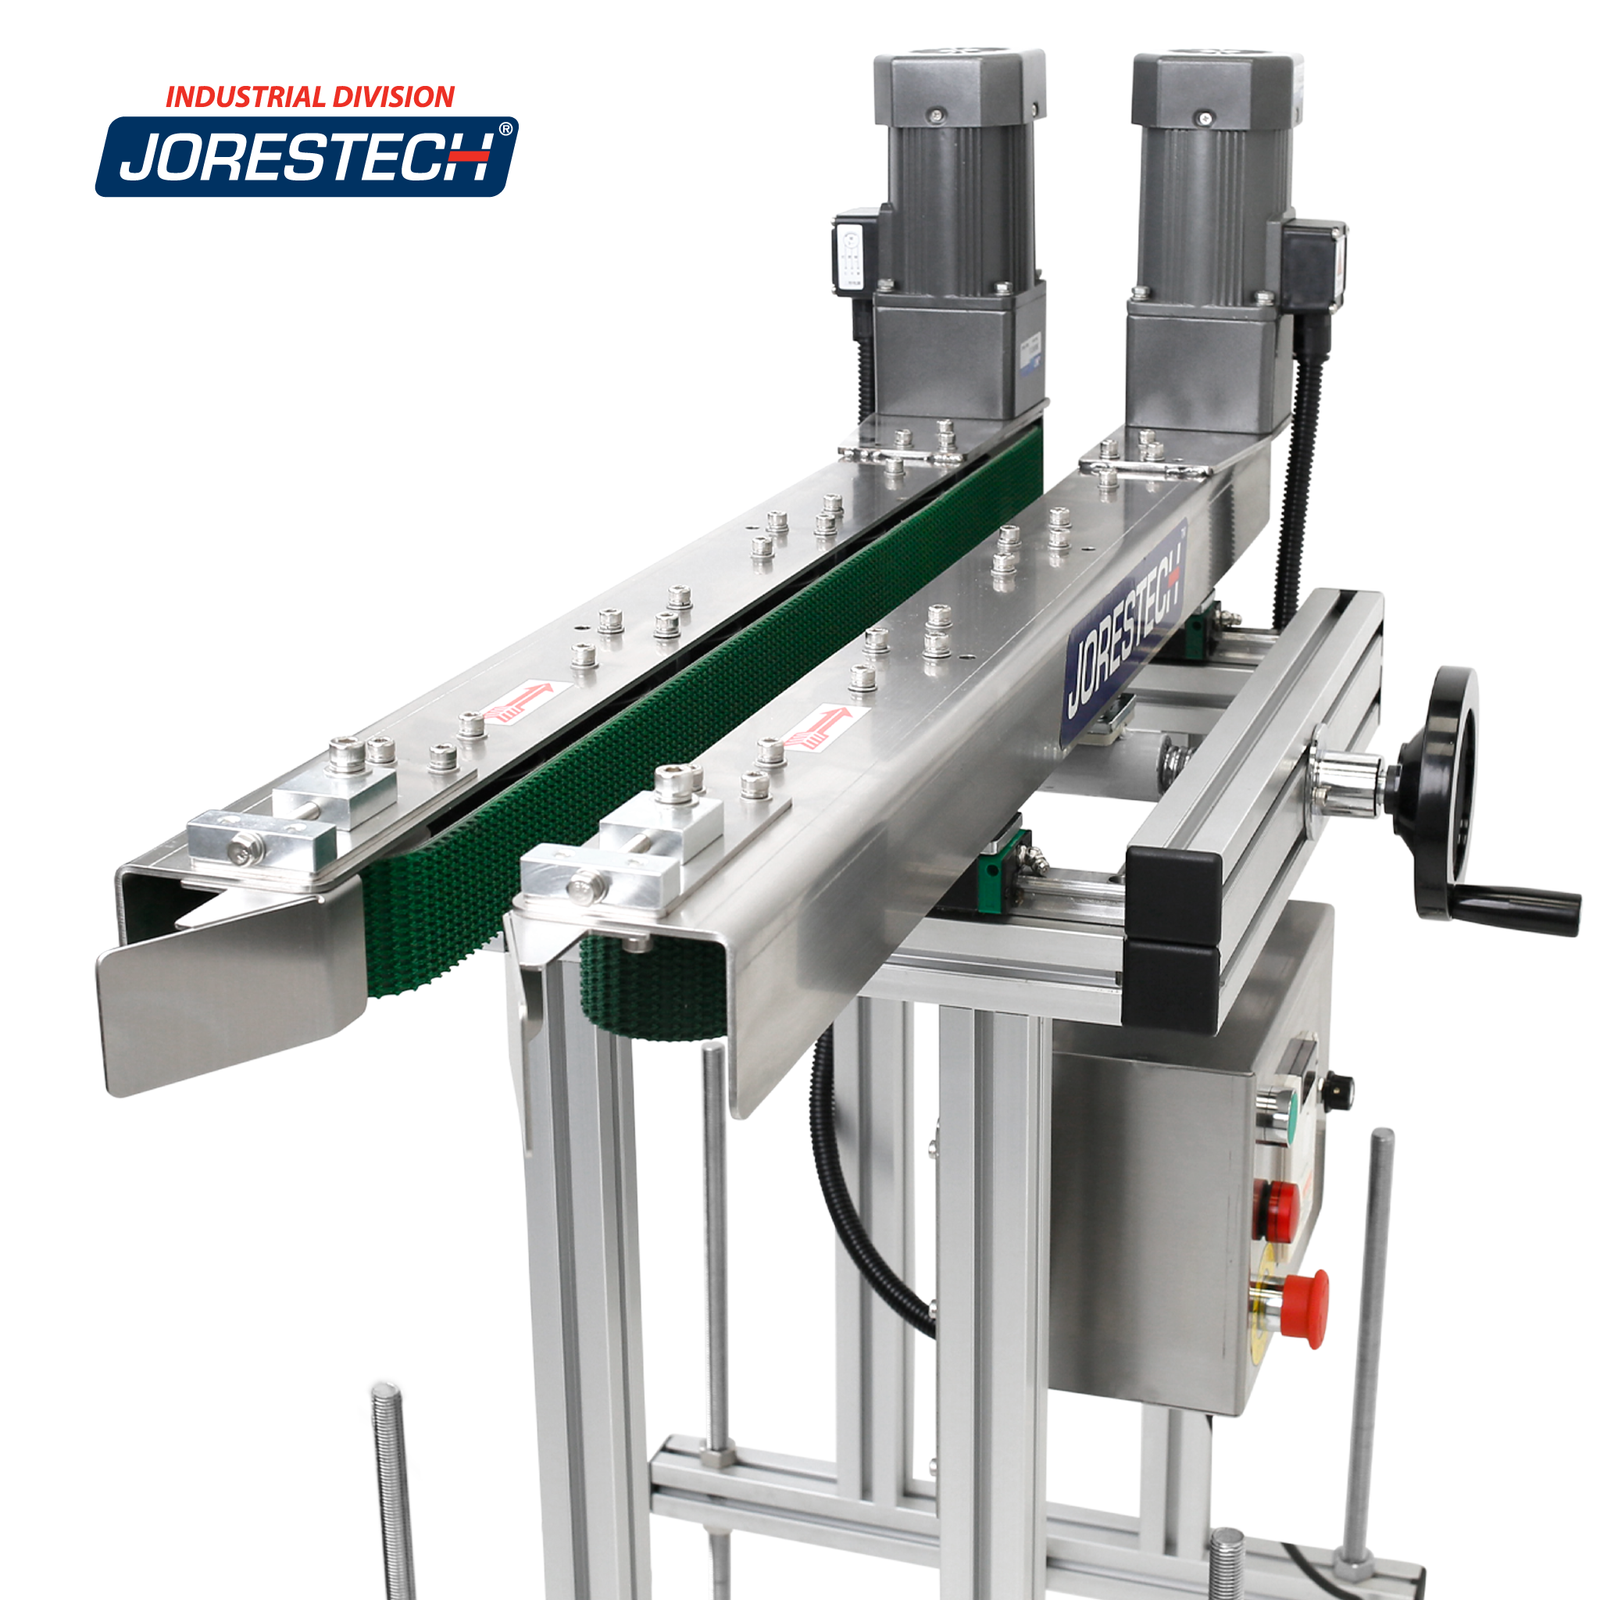 Stainless steel bottomless conveyor with side belts by JORES TECHNOLOGIES®